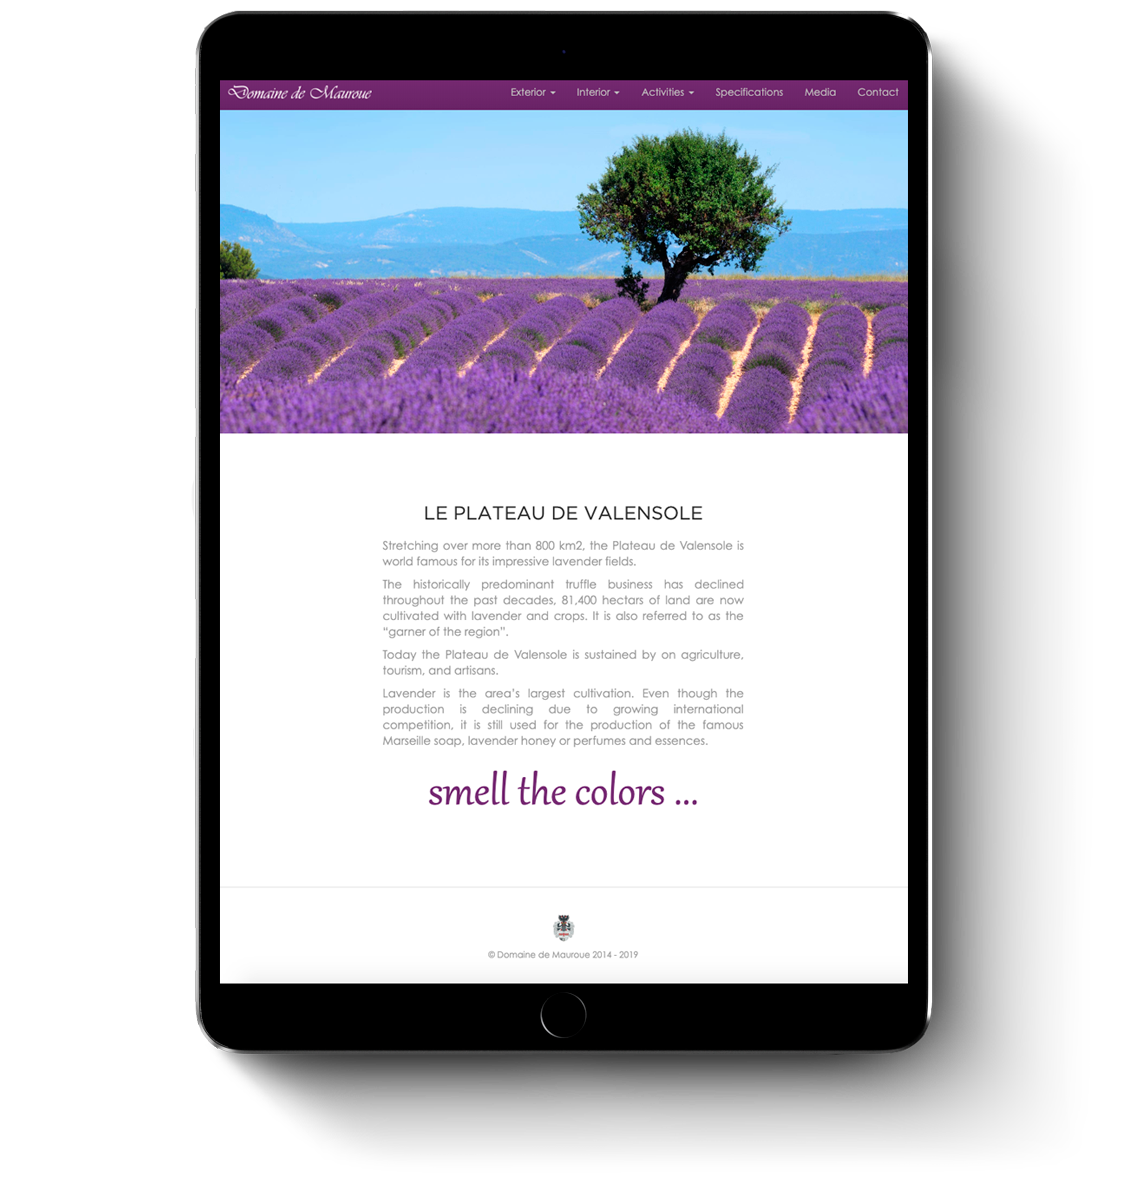 Domaine de Mauroue web design for mobile devices and tablets